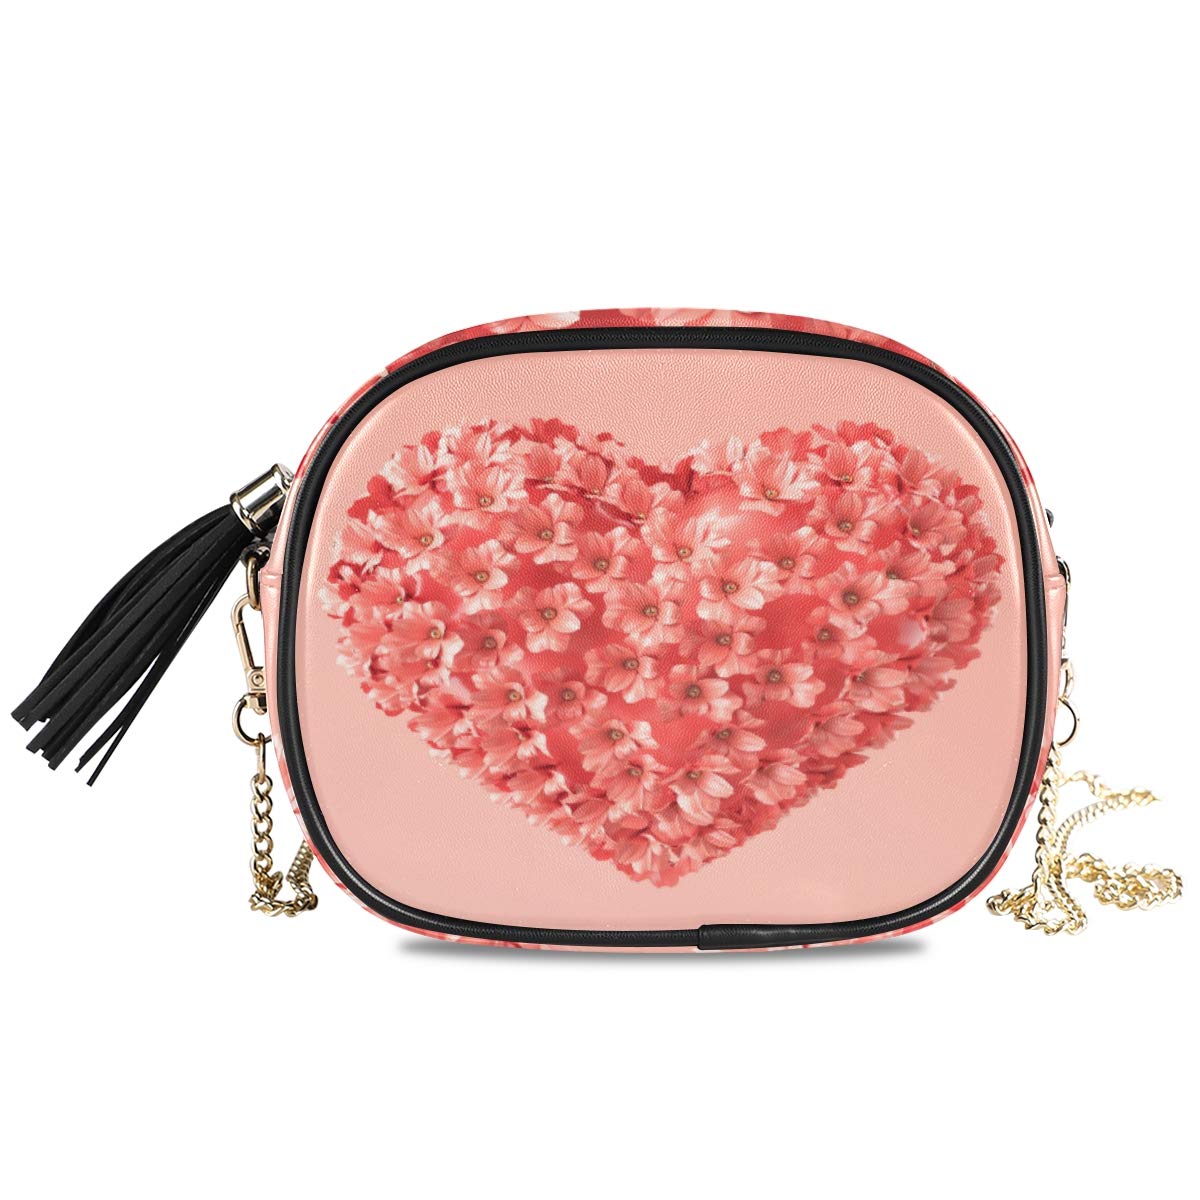 Crossbody Heart Purse for Girls - For Valentine's Day or All Year